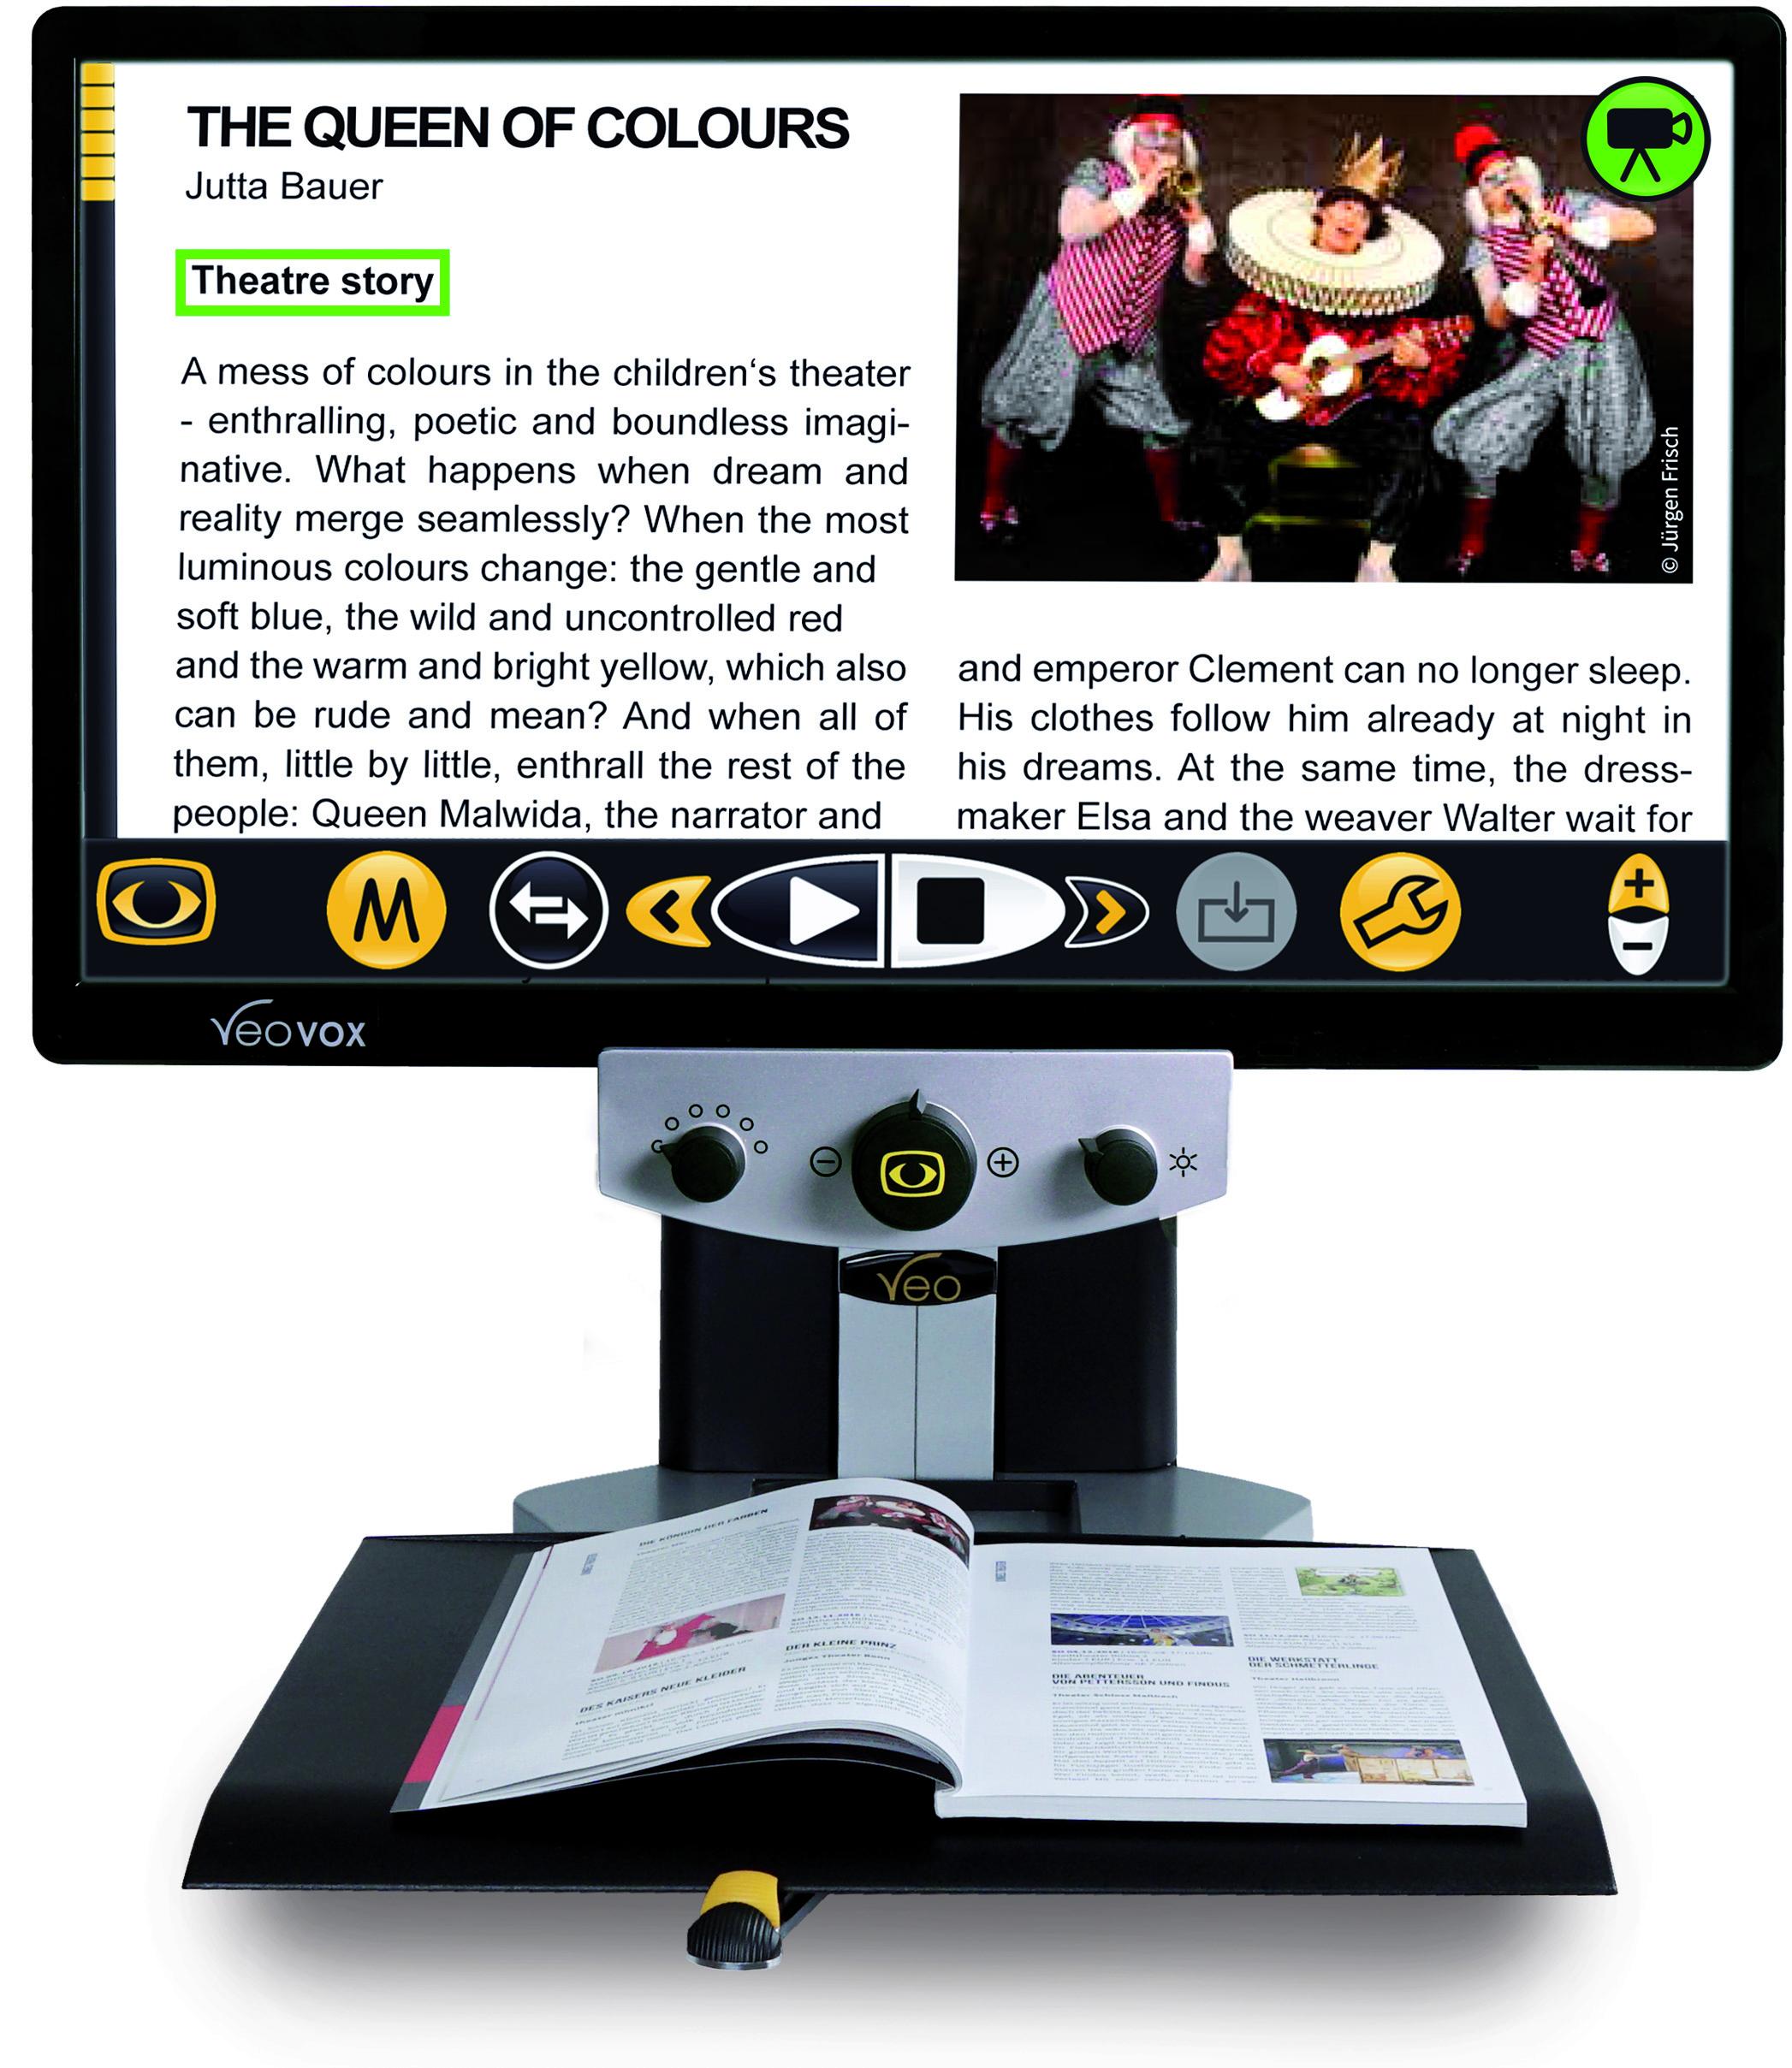 VEO Vox desktop magnifier with speech displaying magazine page on the 24" screen